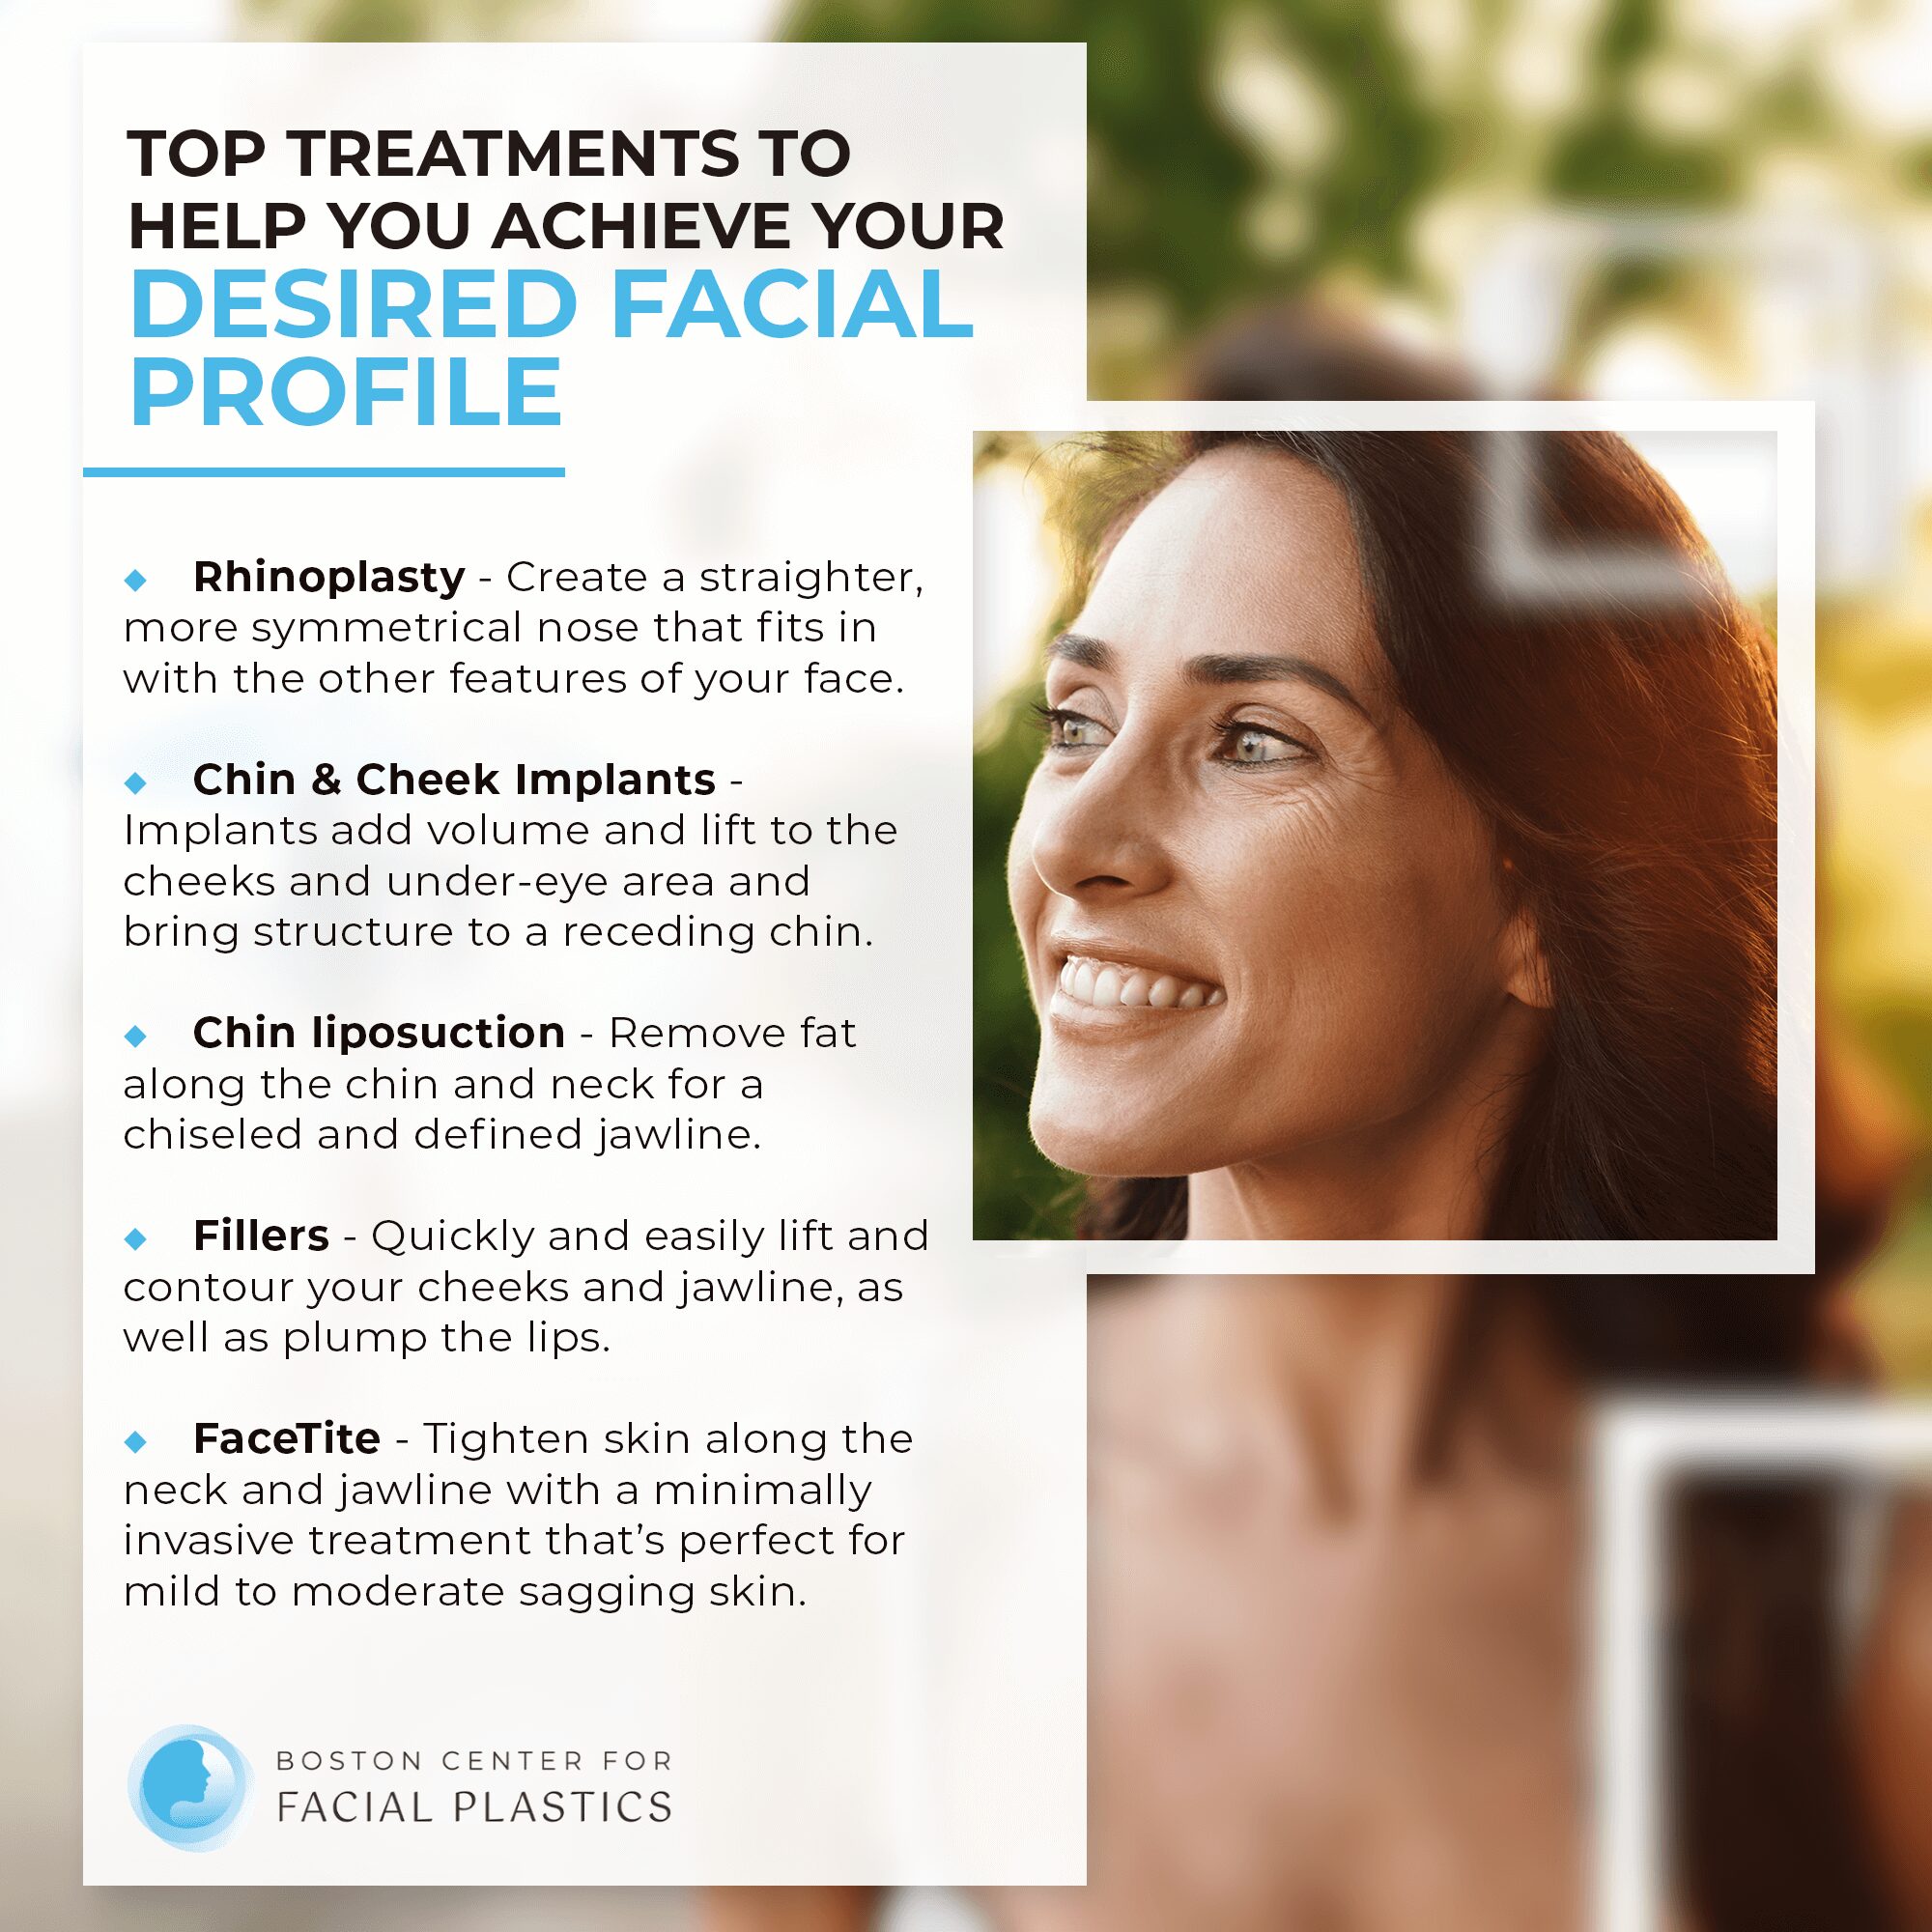 Top Treatments to Help You Achieve Your Desired Facial Profile